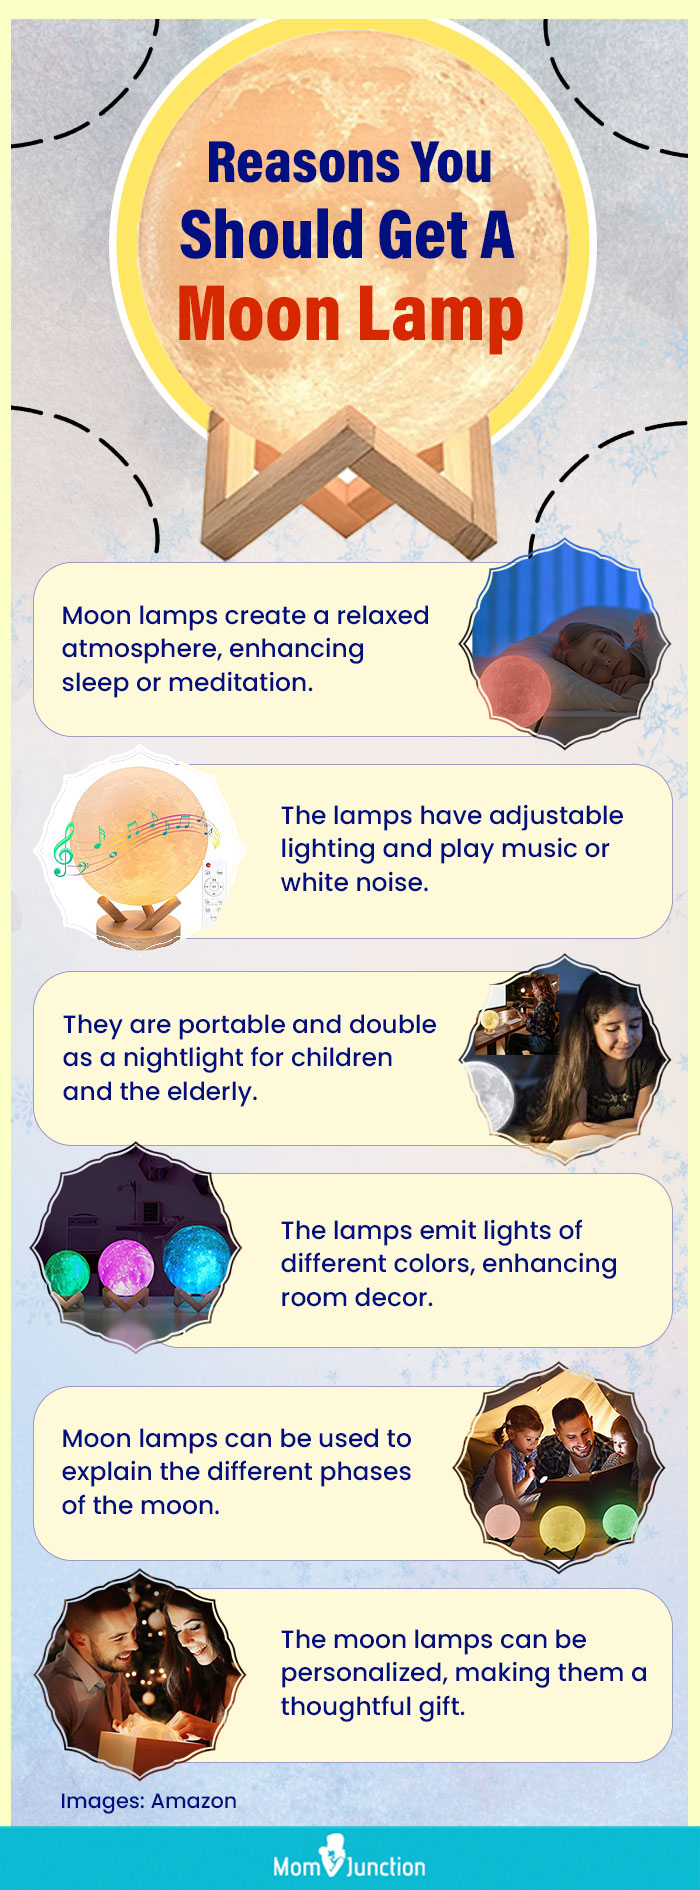 Reasons You Should Get A Moon Lamp (infographic)